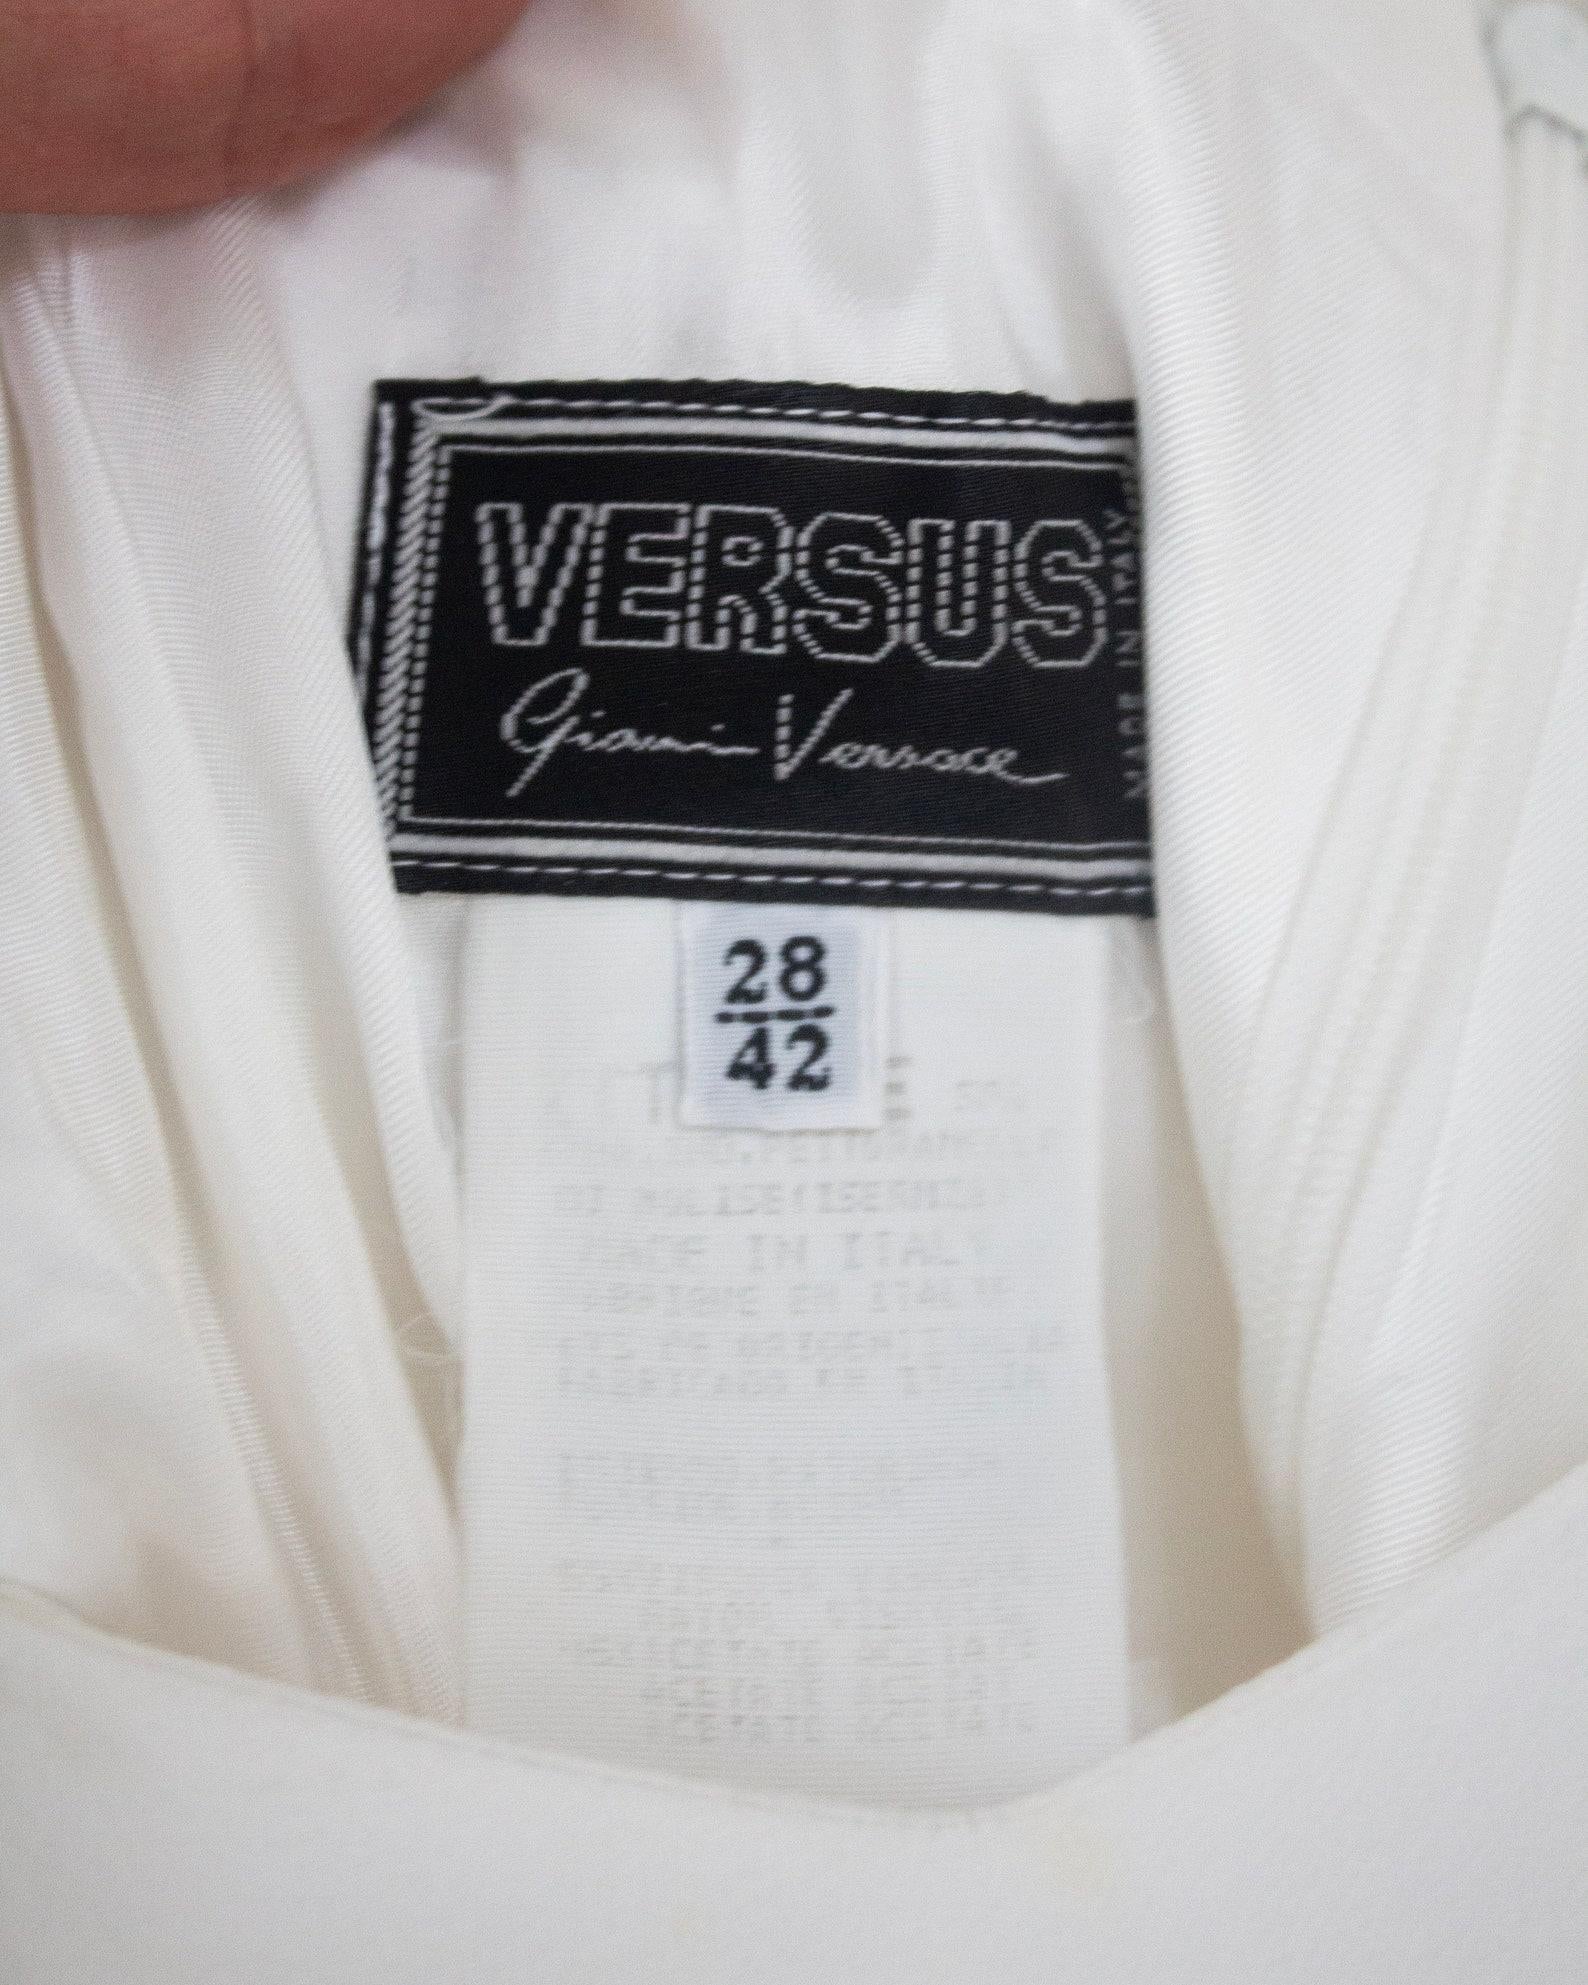 Gray Versus by Gianni Versace 90's white slip dress with silver rhinestones shoulder  For Sale